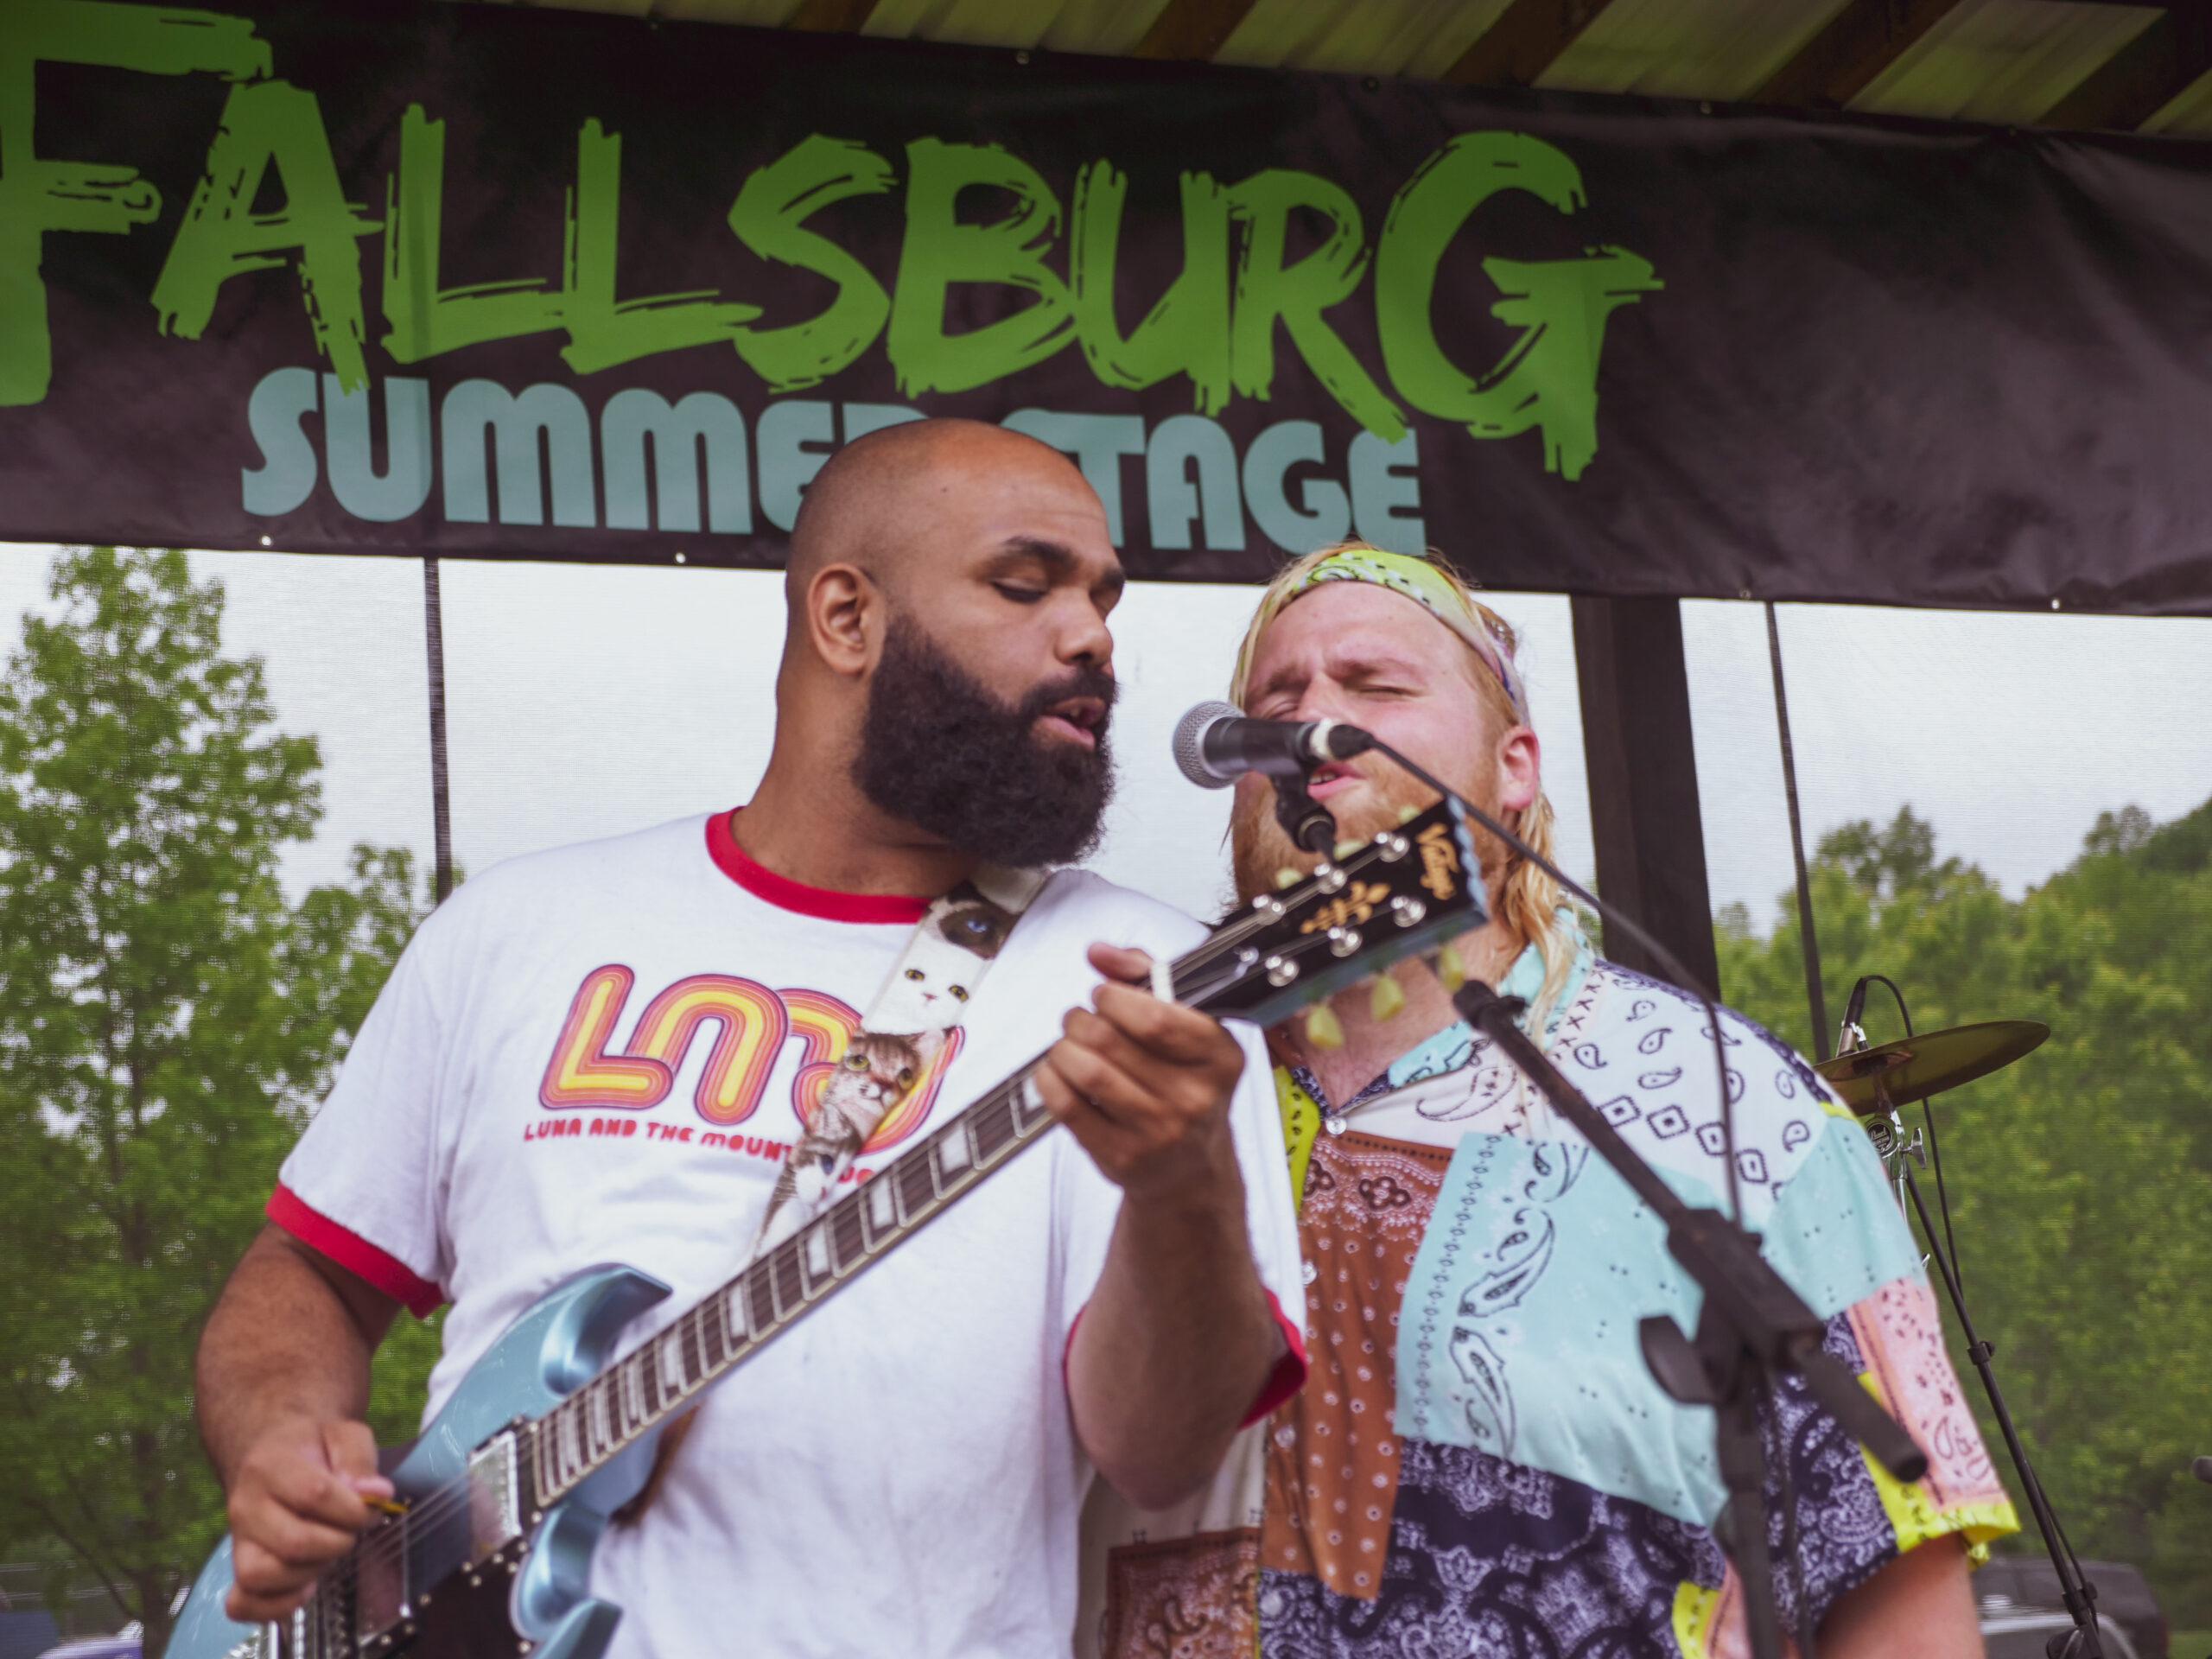 Strong gathering for Fallsburg Summer Stage [GALLERY]